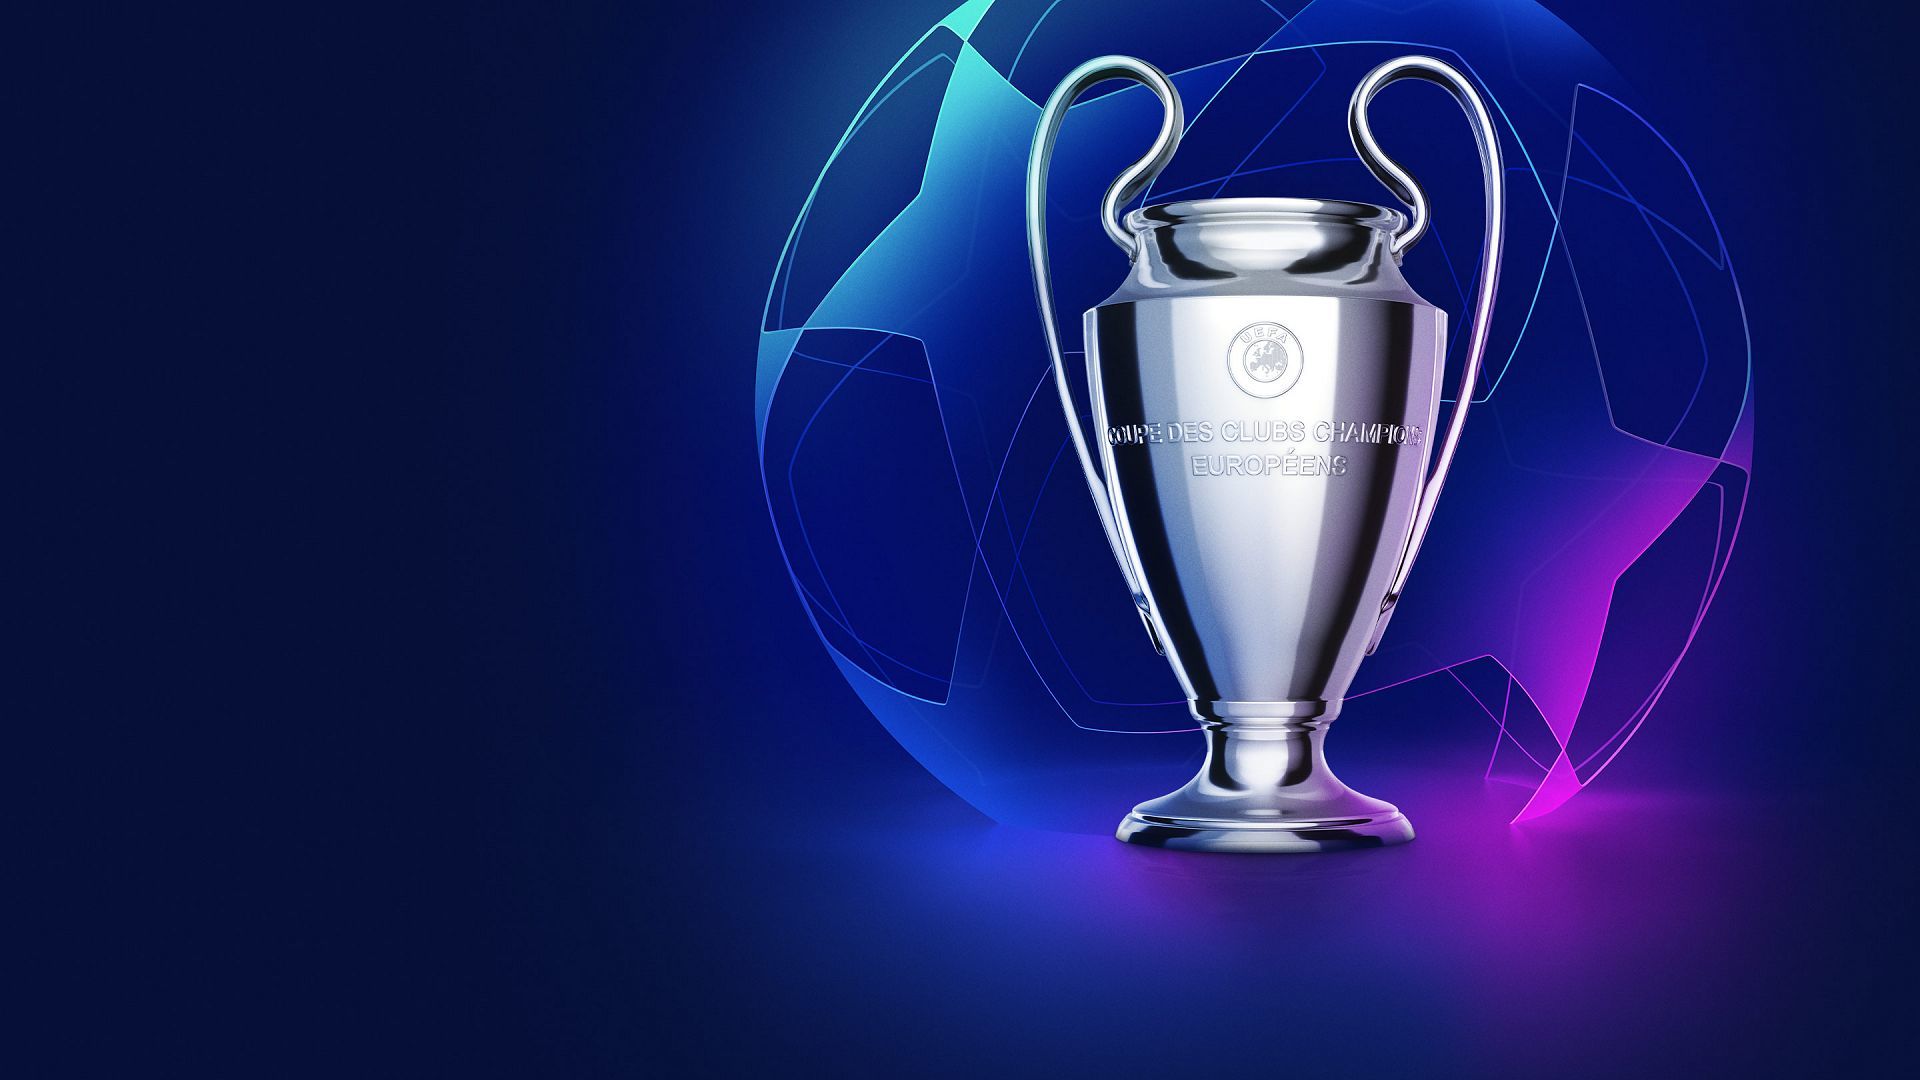 UEFA Champions League 2021/22: The biggest “losers”, the favorites, and the odds